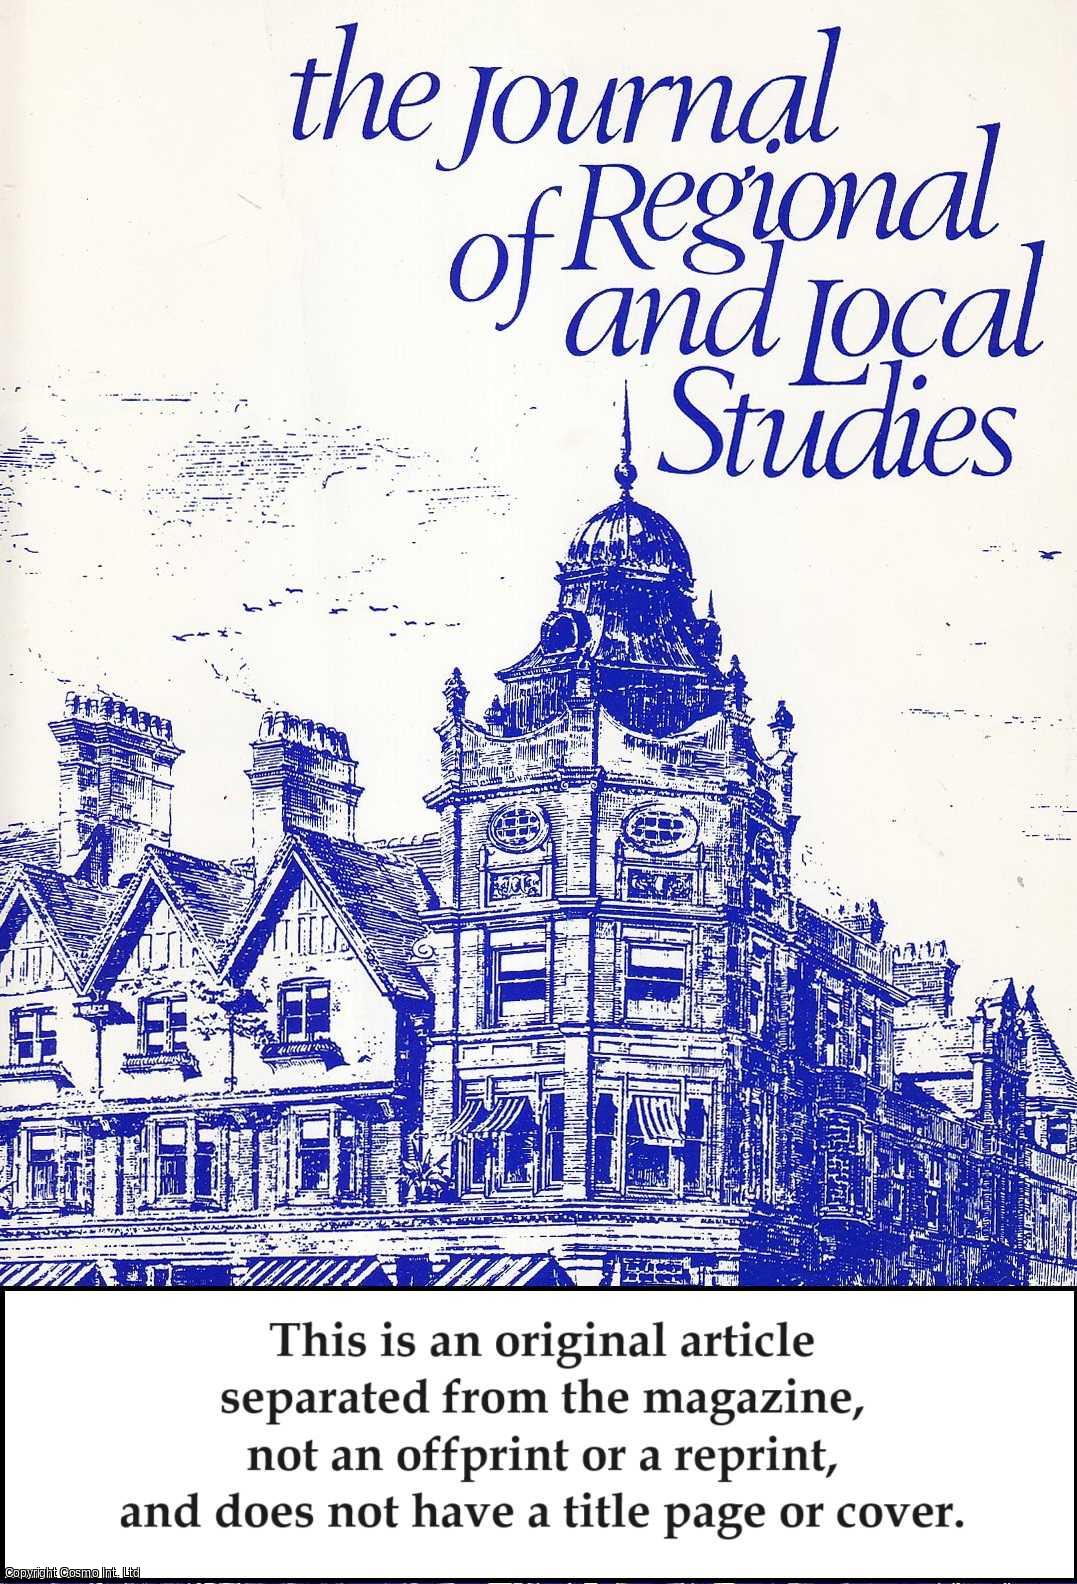 M. Huggins - Residential Visitors and Day Trippers to Redcar and Coatham, 1865-90. An original article from Journal of Regional & Local Studies, 1983.